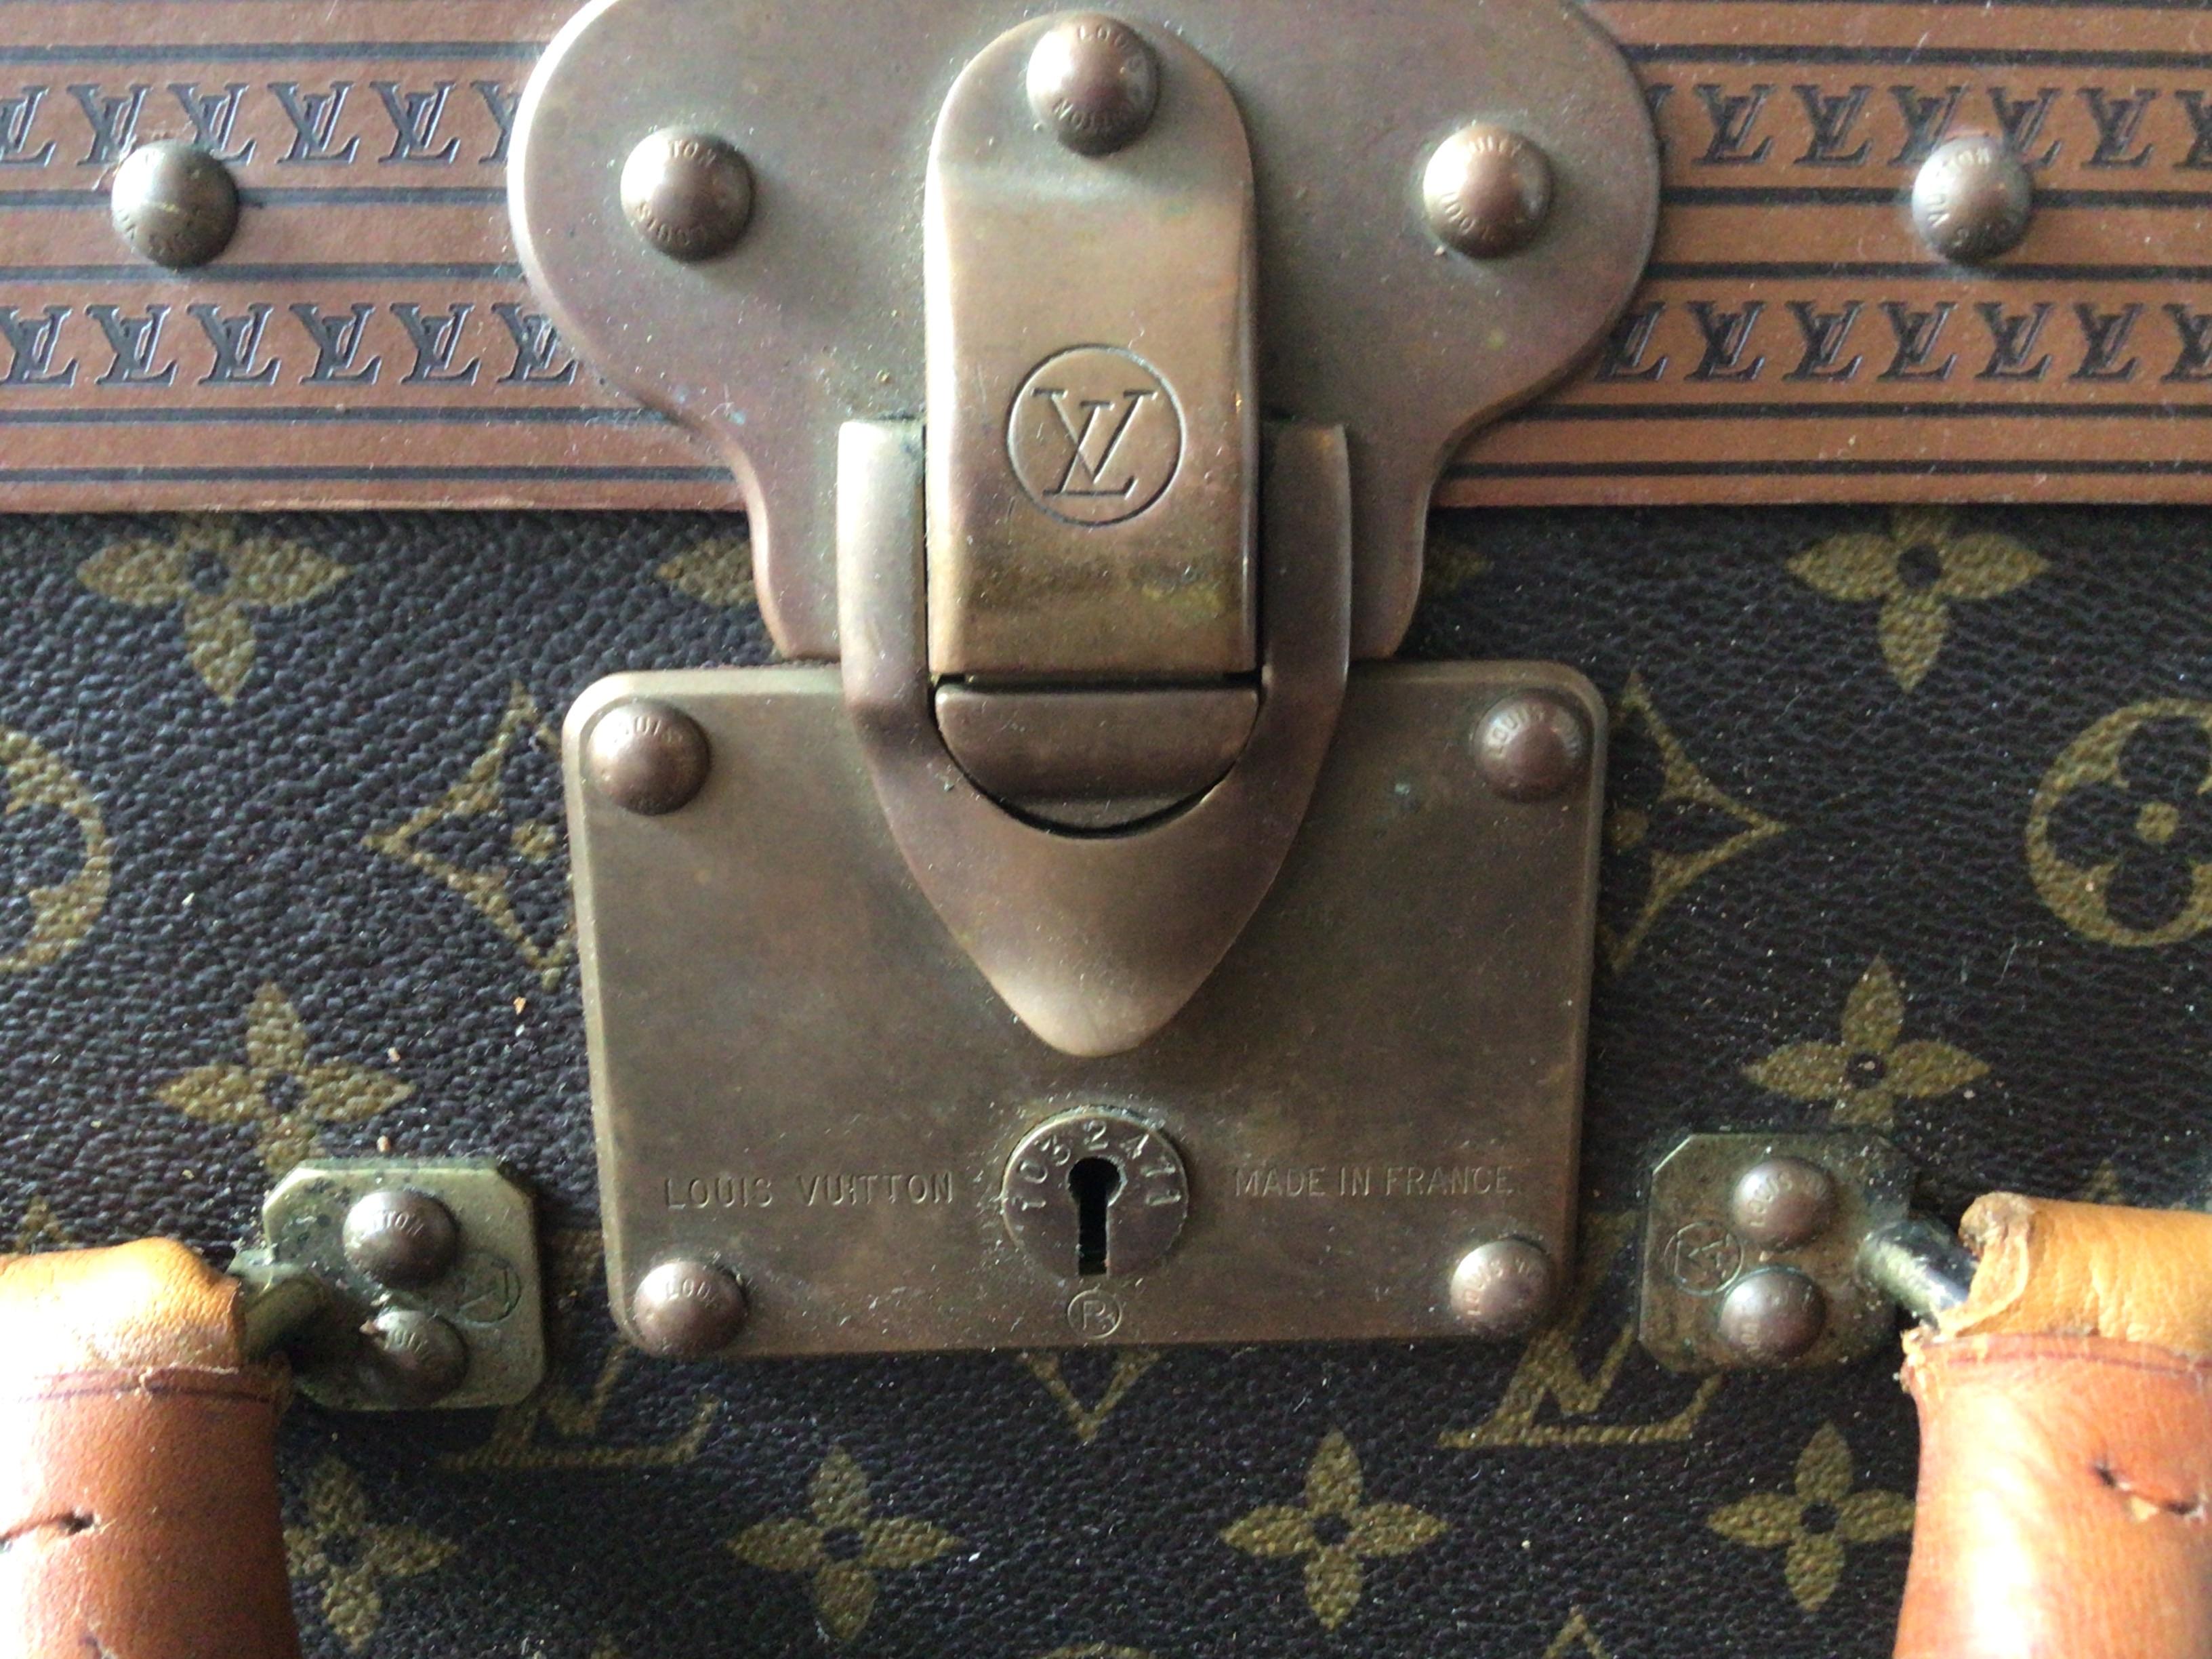 Louis Vuitton Monogram Canvas Trunk Suitcase In Good Condition For Sale In Tarrytown, NY